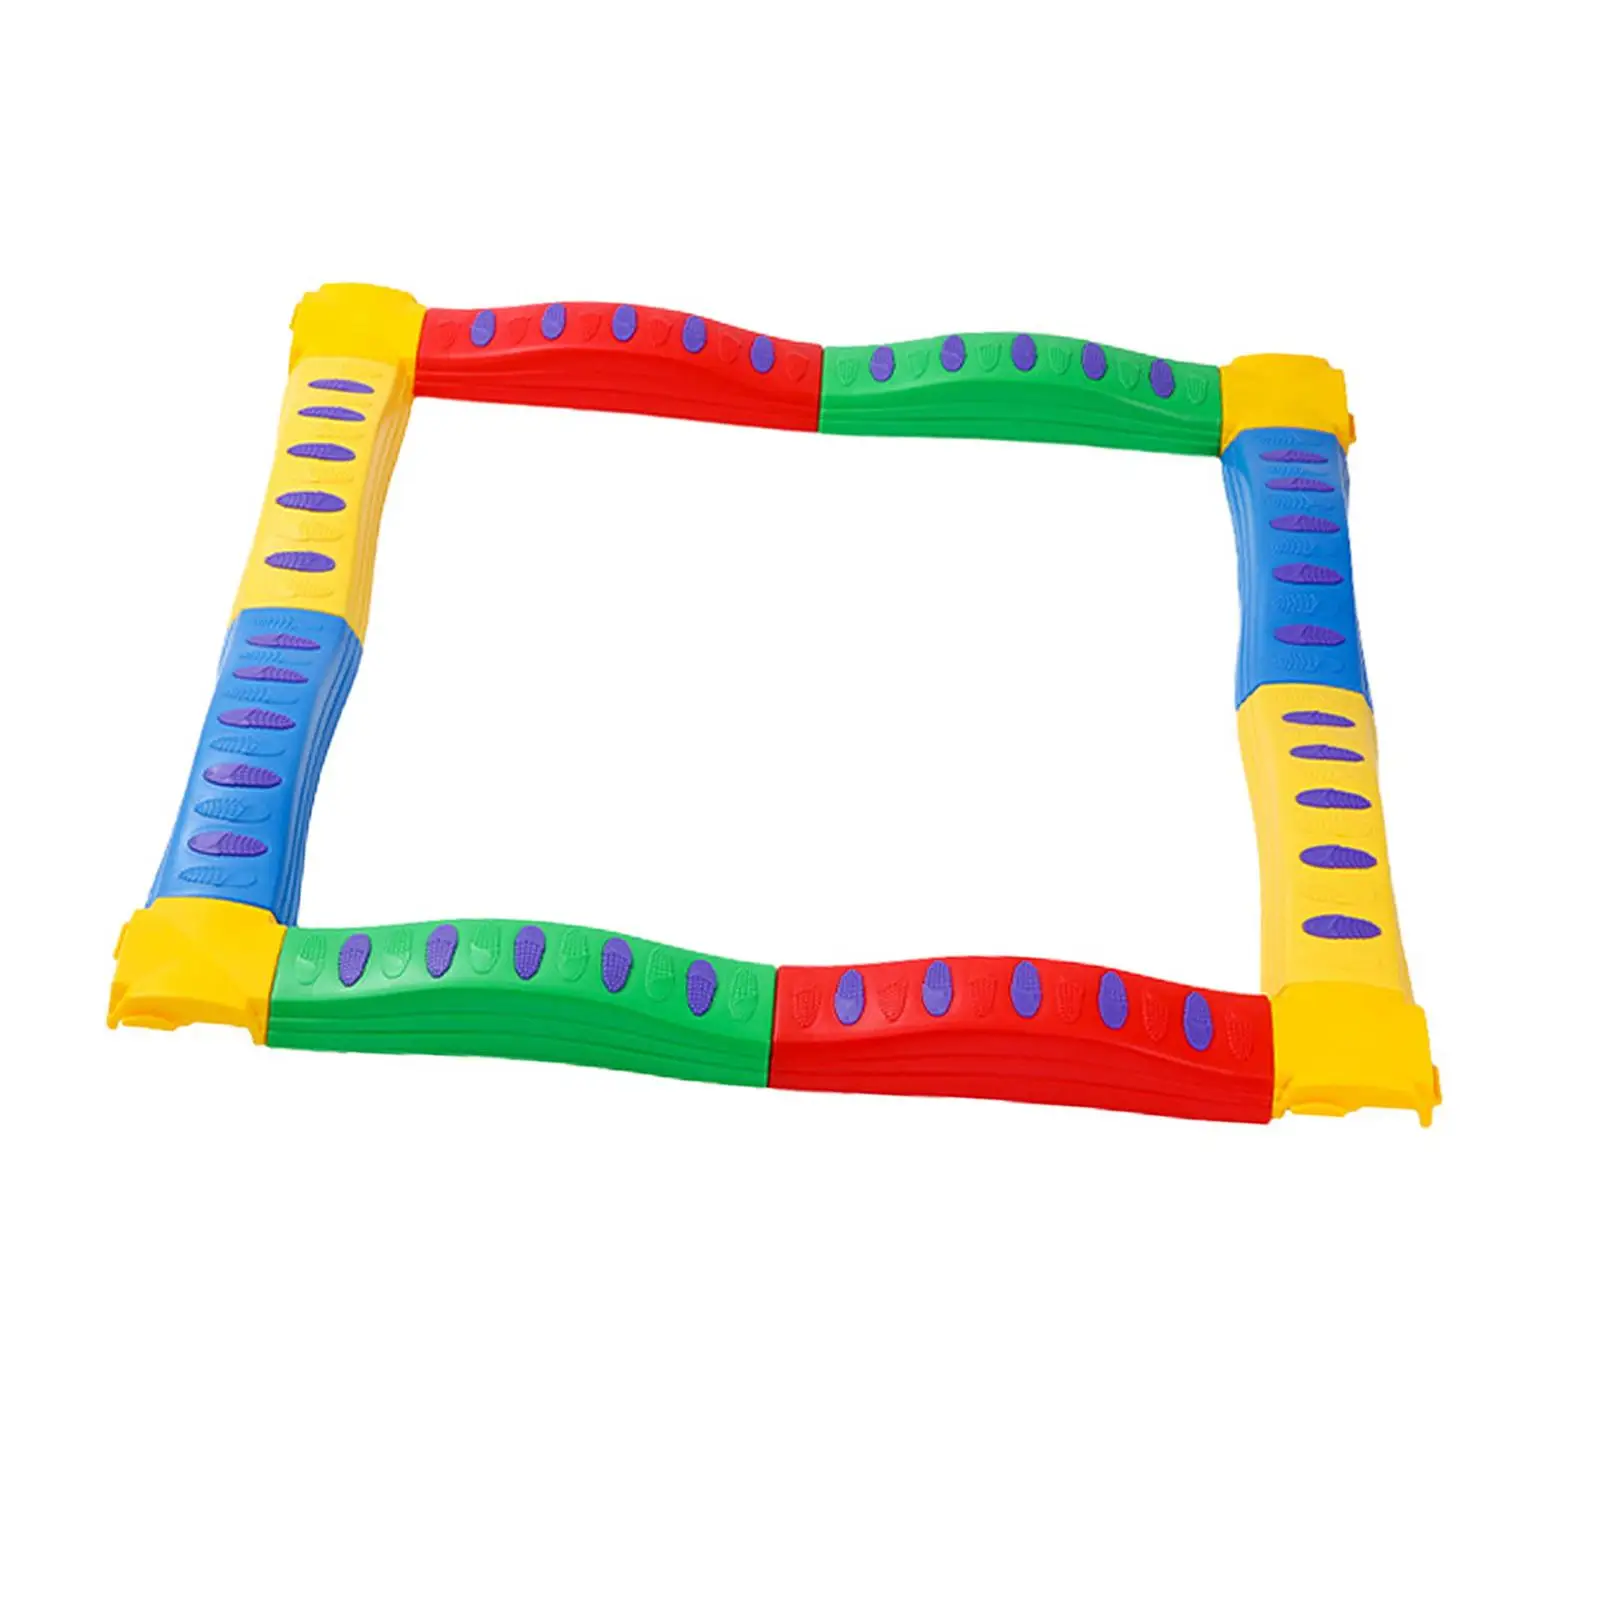 Stepping Stones for Kids Multiple Obstacle Course Multi Ways to Balance Beams Colored Balance Block for Preschool Learning Toy